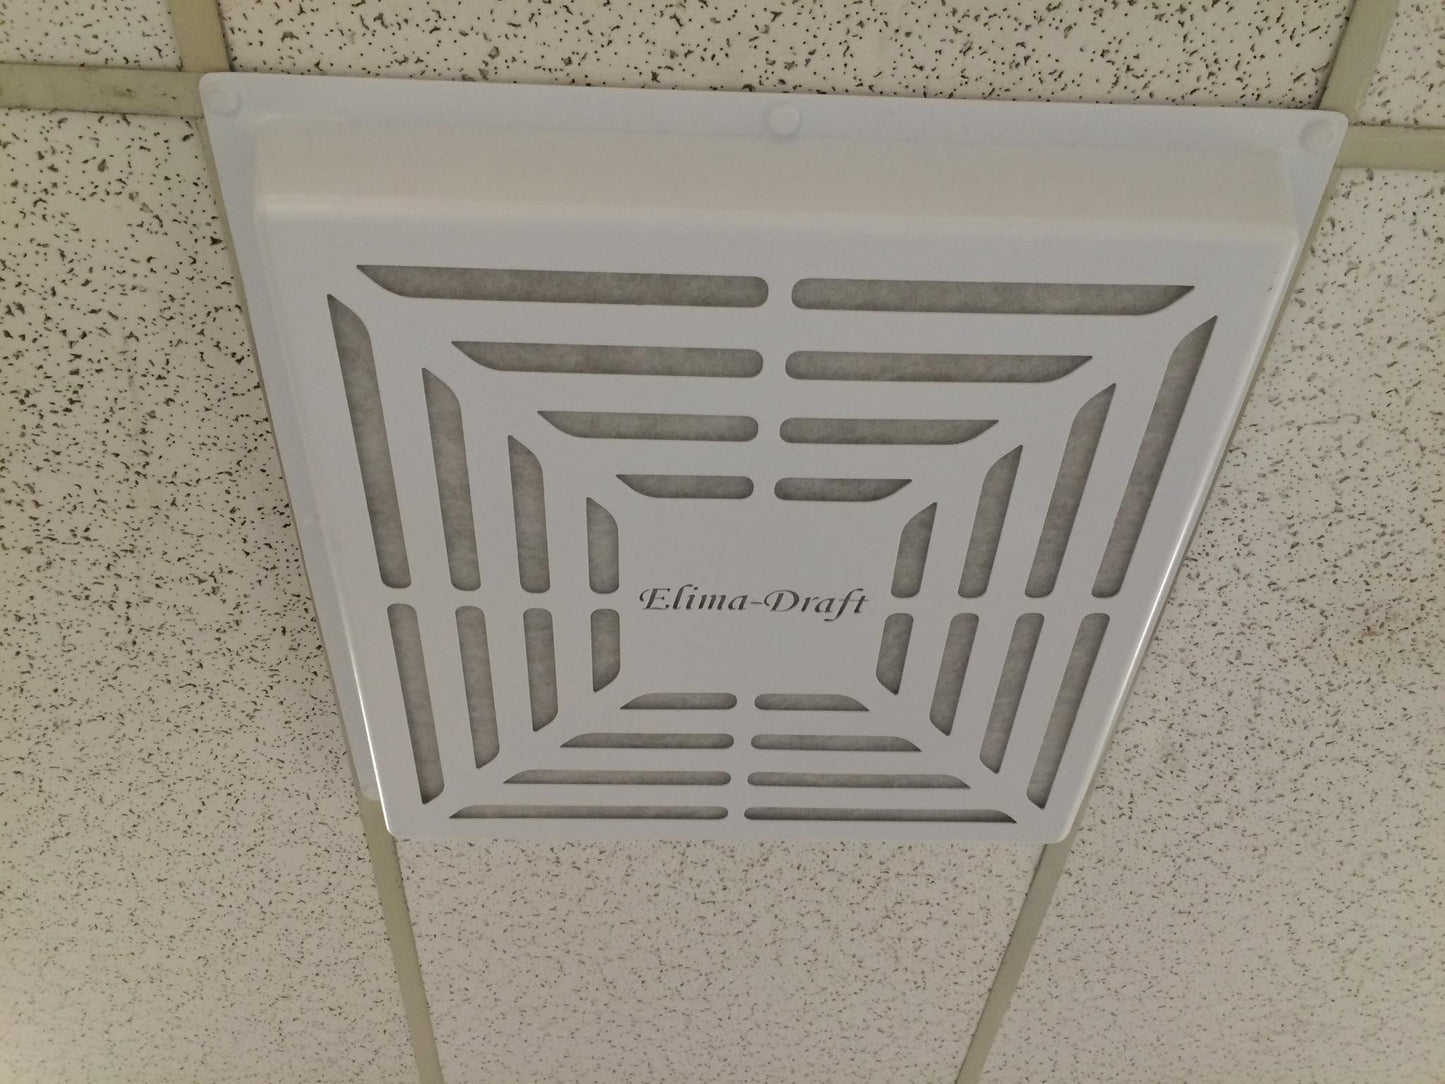 COMMERCIAL FILTRATION DIFFUSER COVER